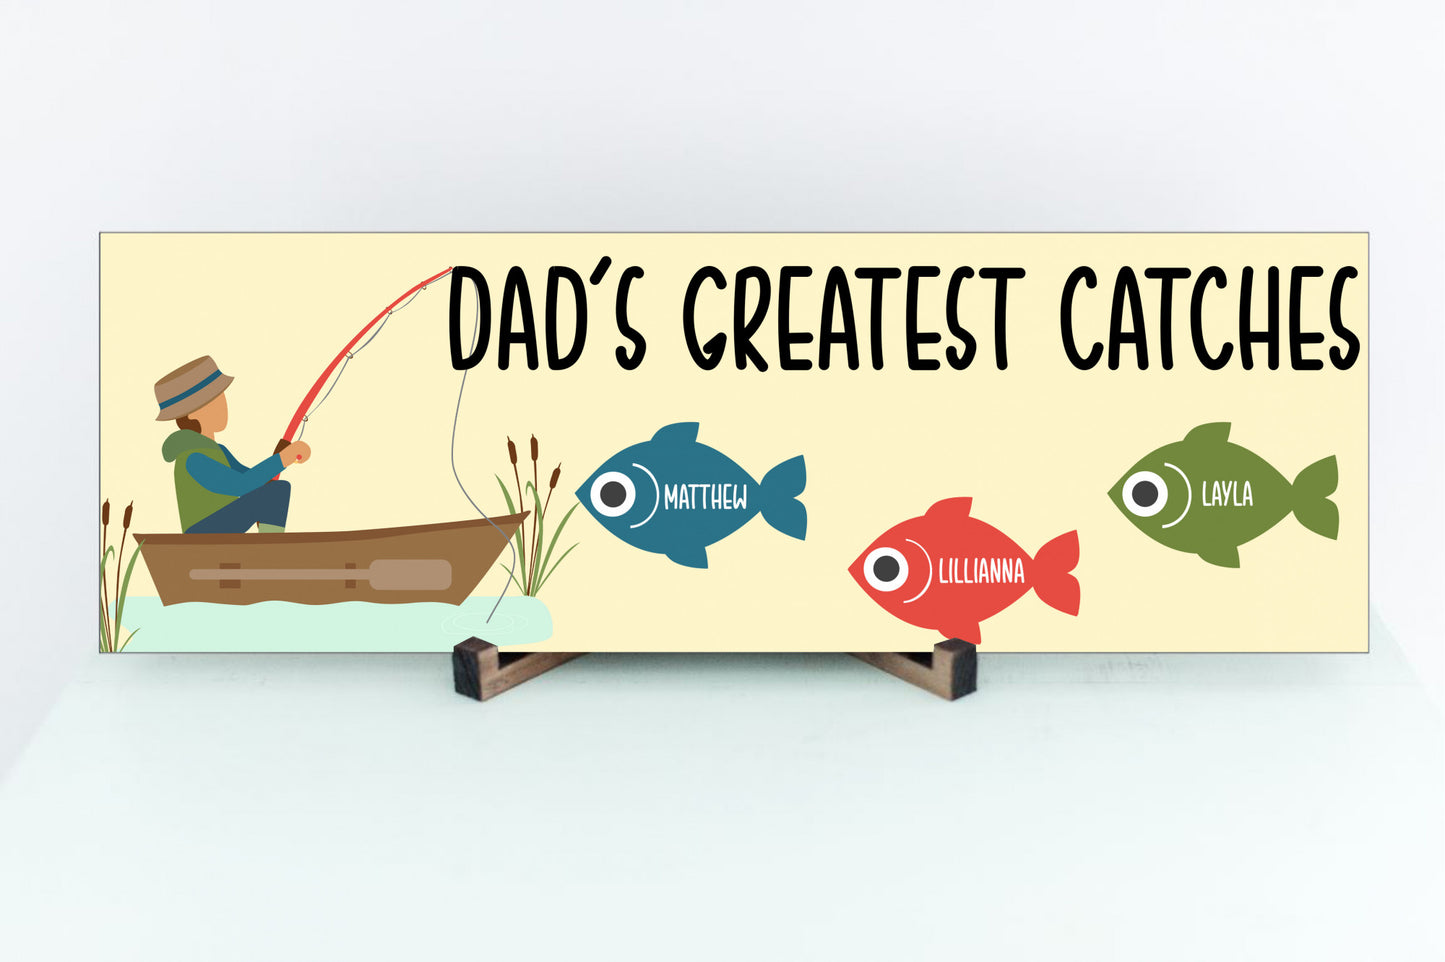 Dad's Greatest Catches Sign, Gift for Dad, Father's Day Gift